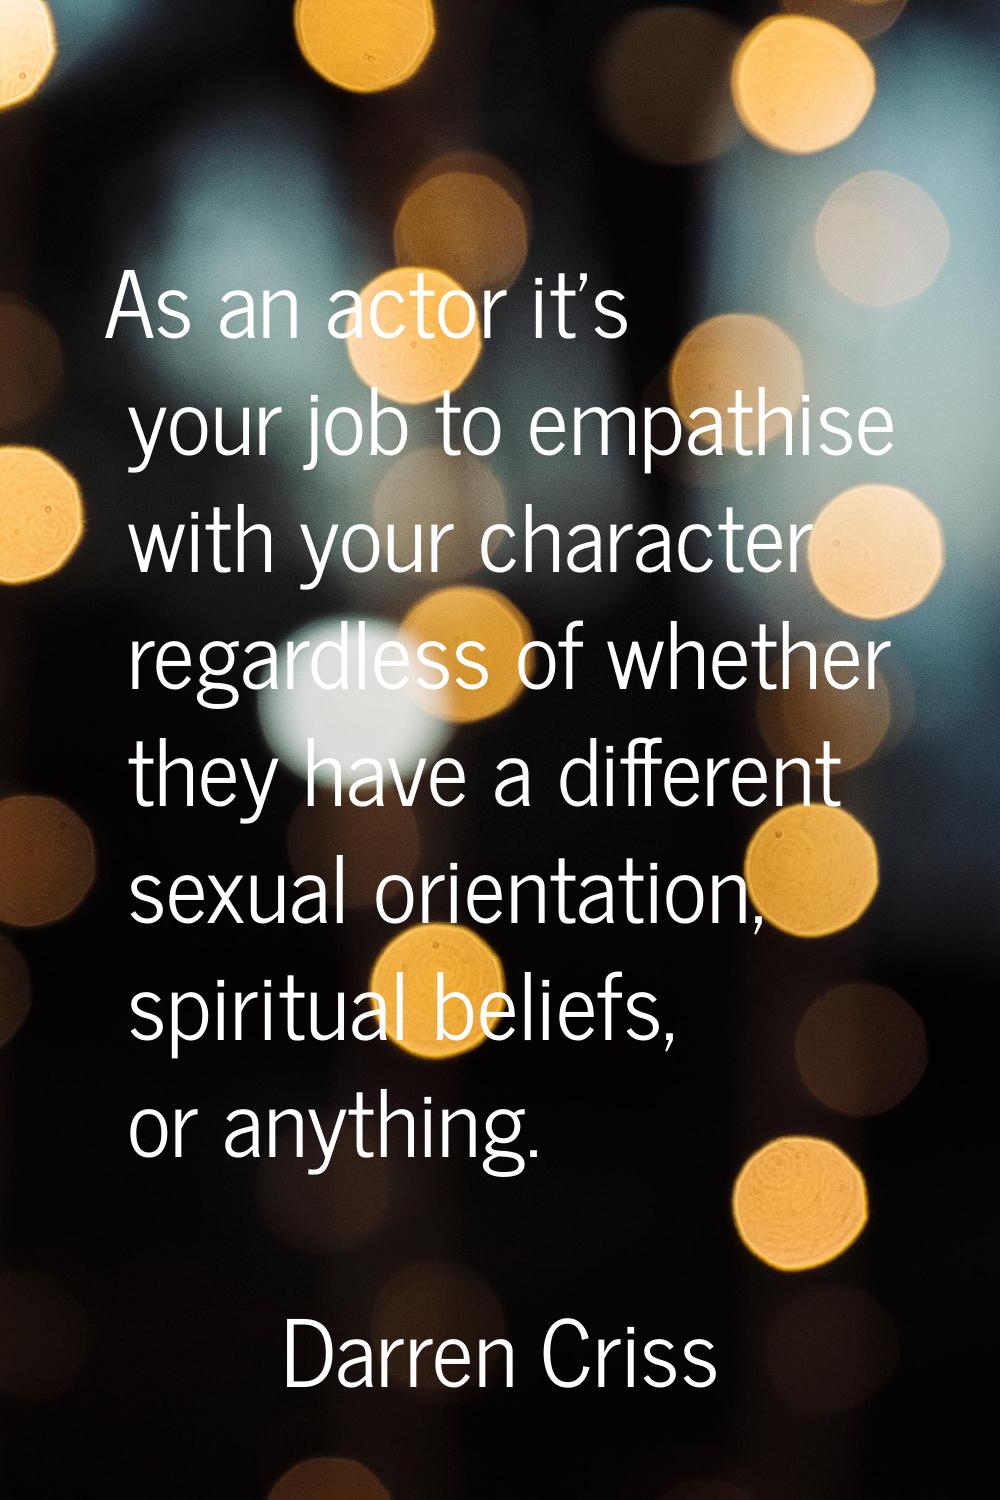 As an actor it's your job to empathise with your character regardless of whether they have a differ